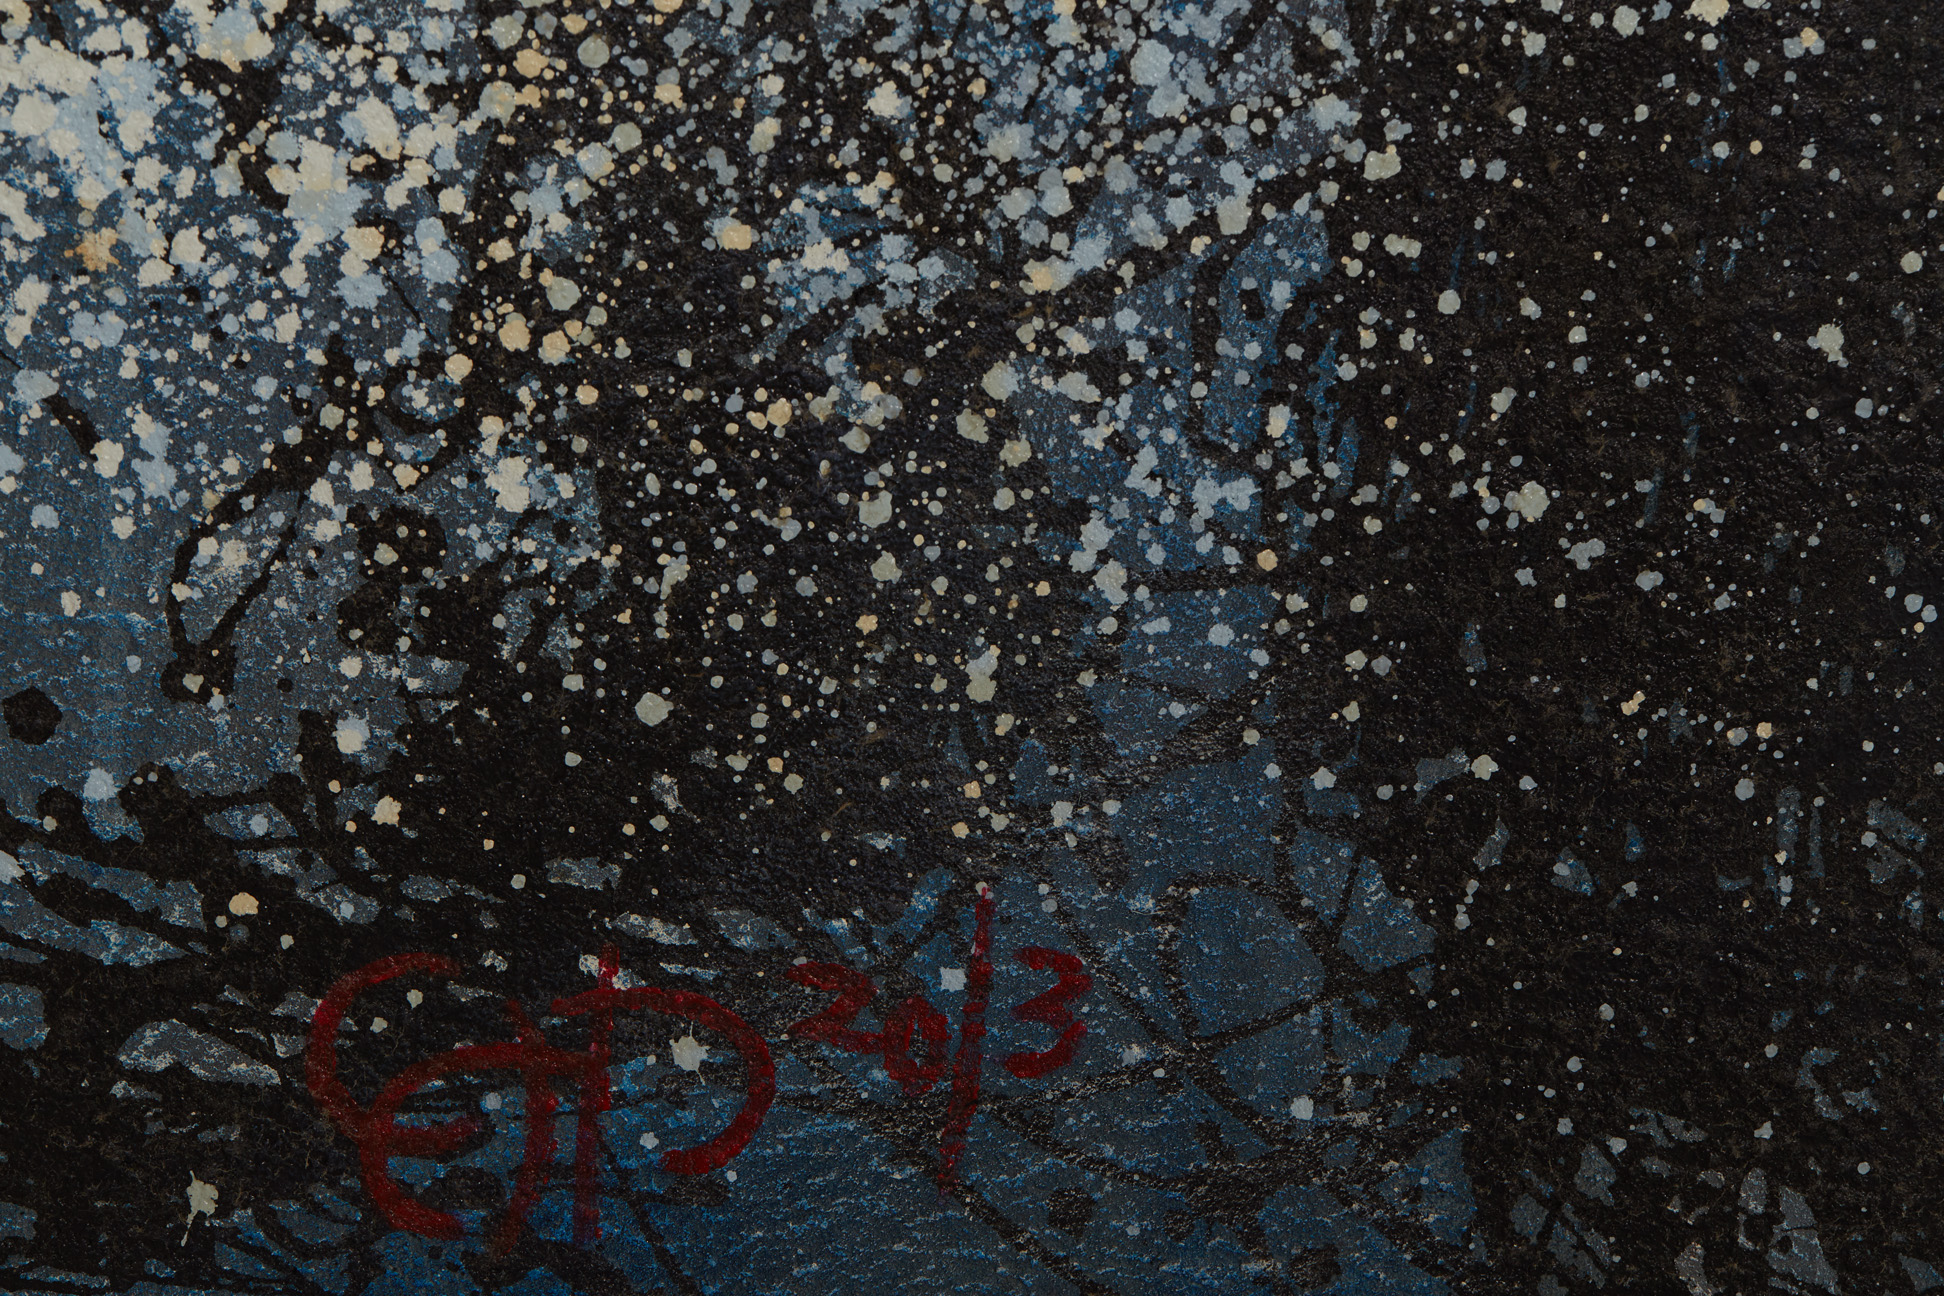 LE ANH CAN (VIETNAMESE, B. 1985) - 'WINTER ARRIVES' - Image 3 of 4